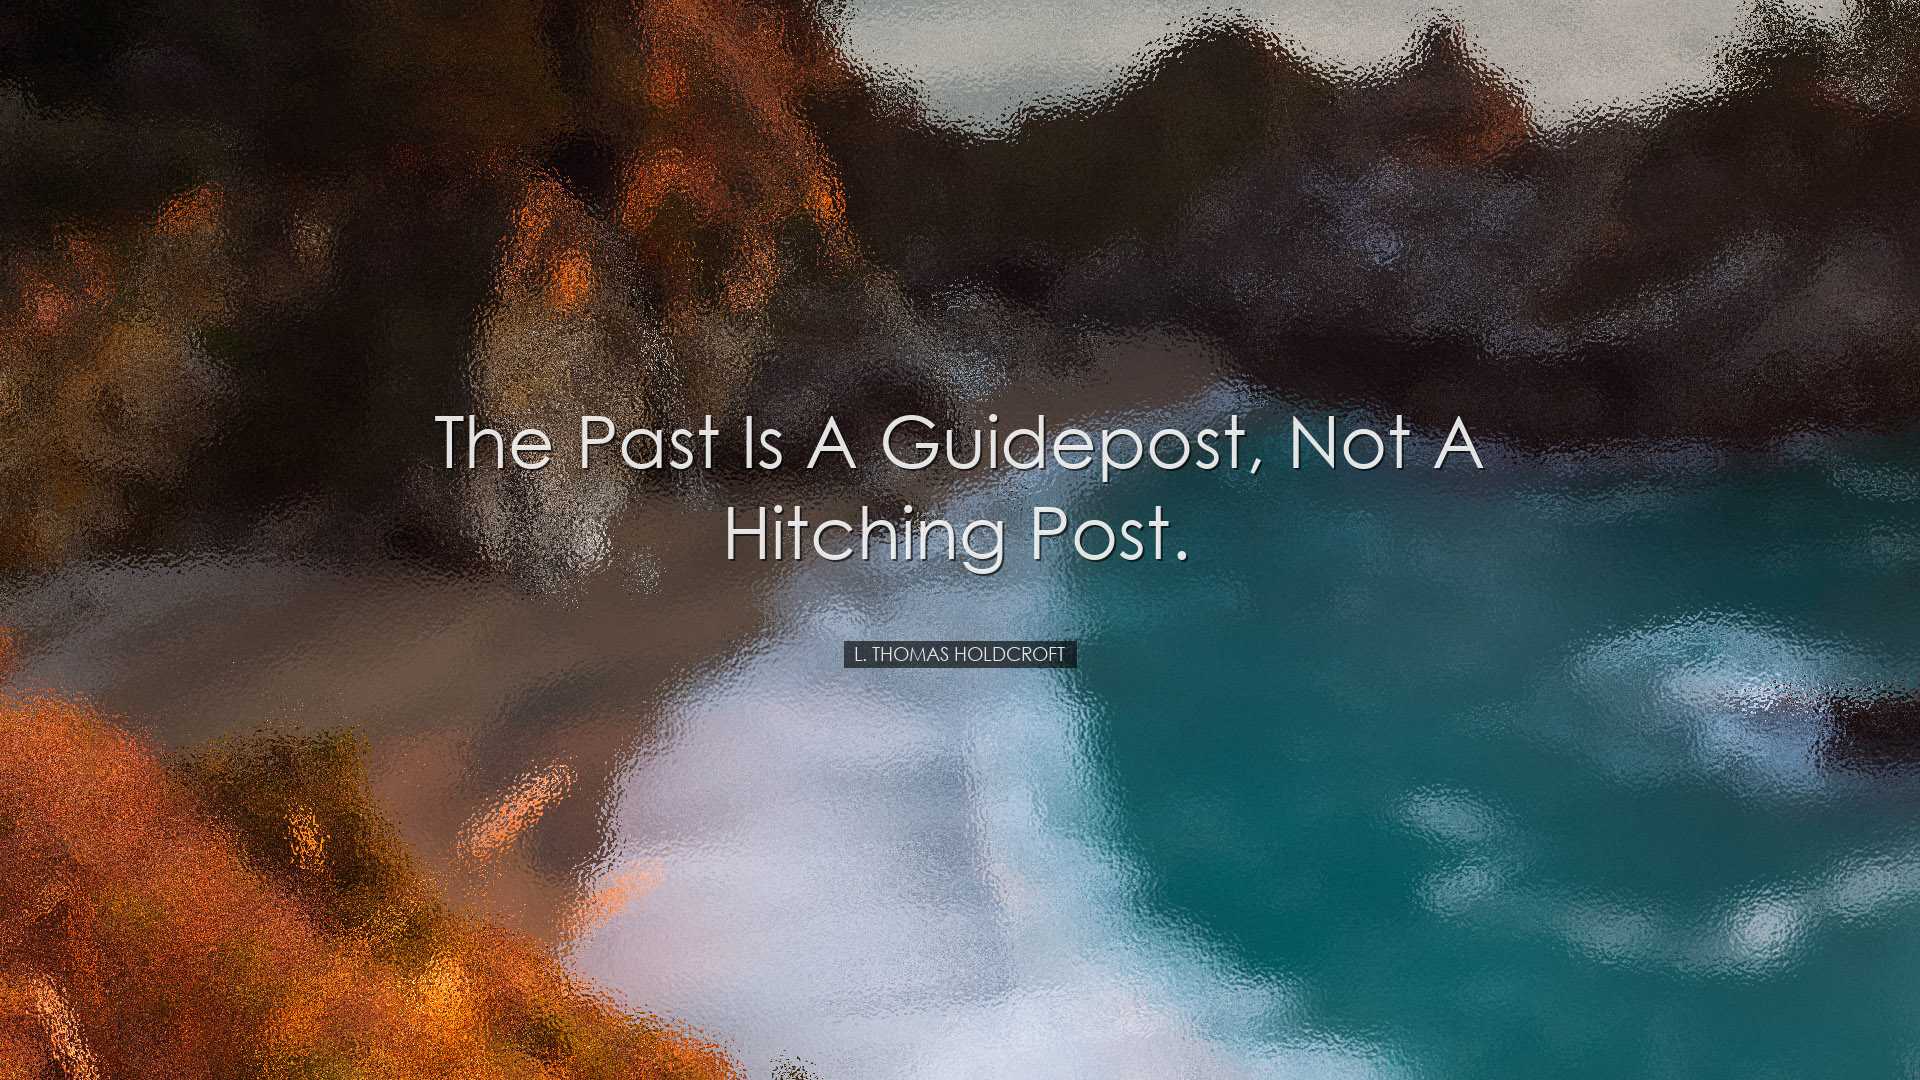 The past is a guidepost, not a hitching post. - L. Thomas Holdcrof